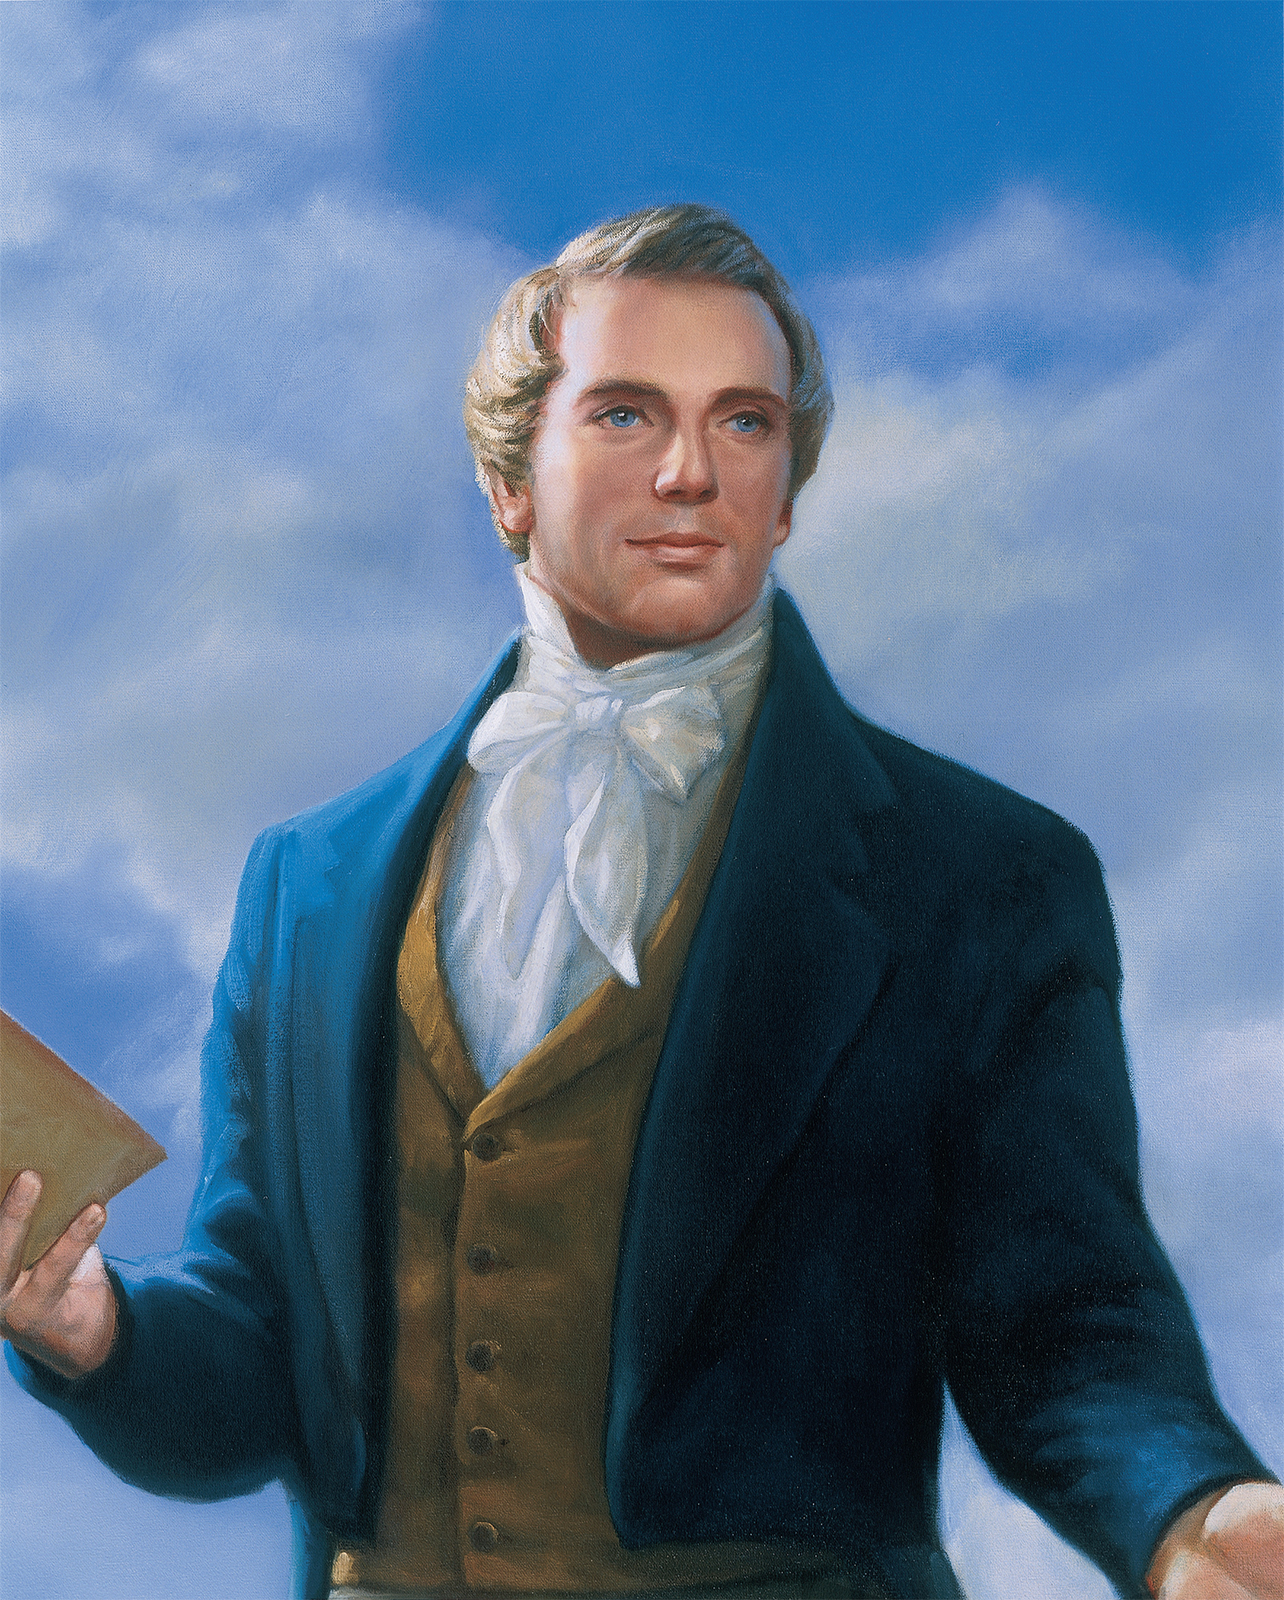 A painted portrait by David Lindsley of Joseph Smith standing and holding a Book of Mormon in one hand, with clouds in the sky.